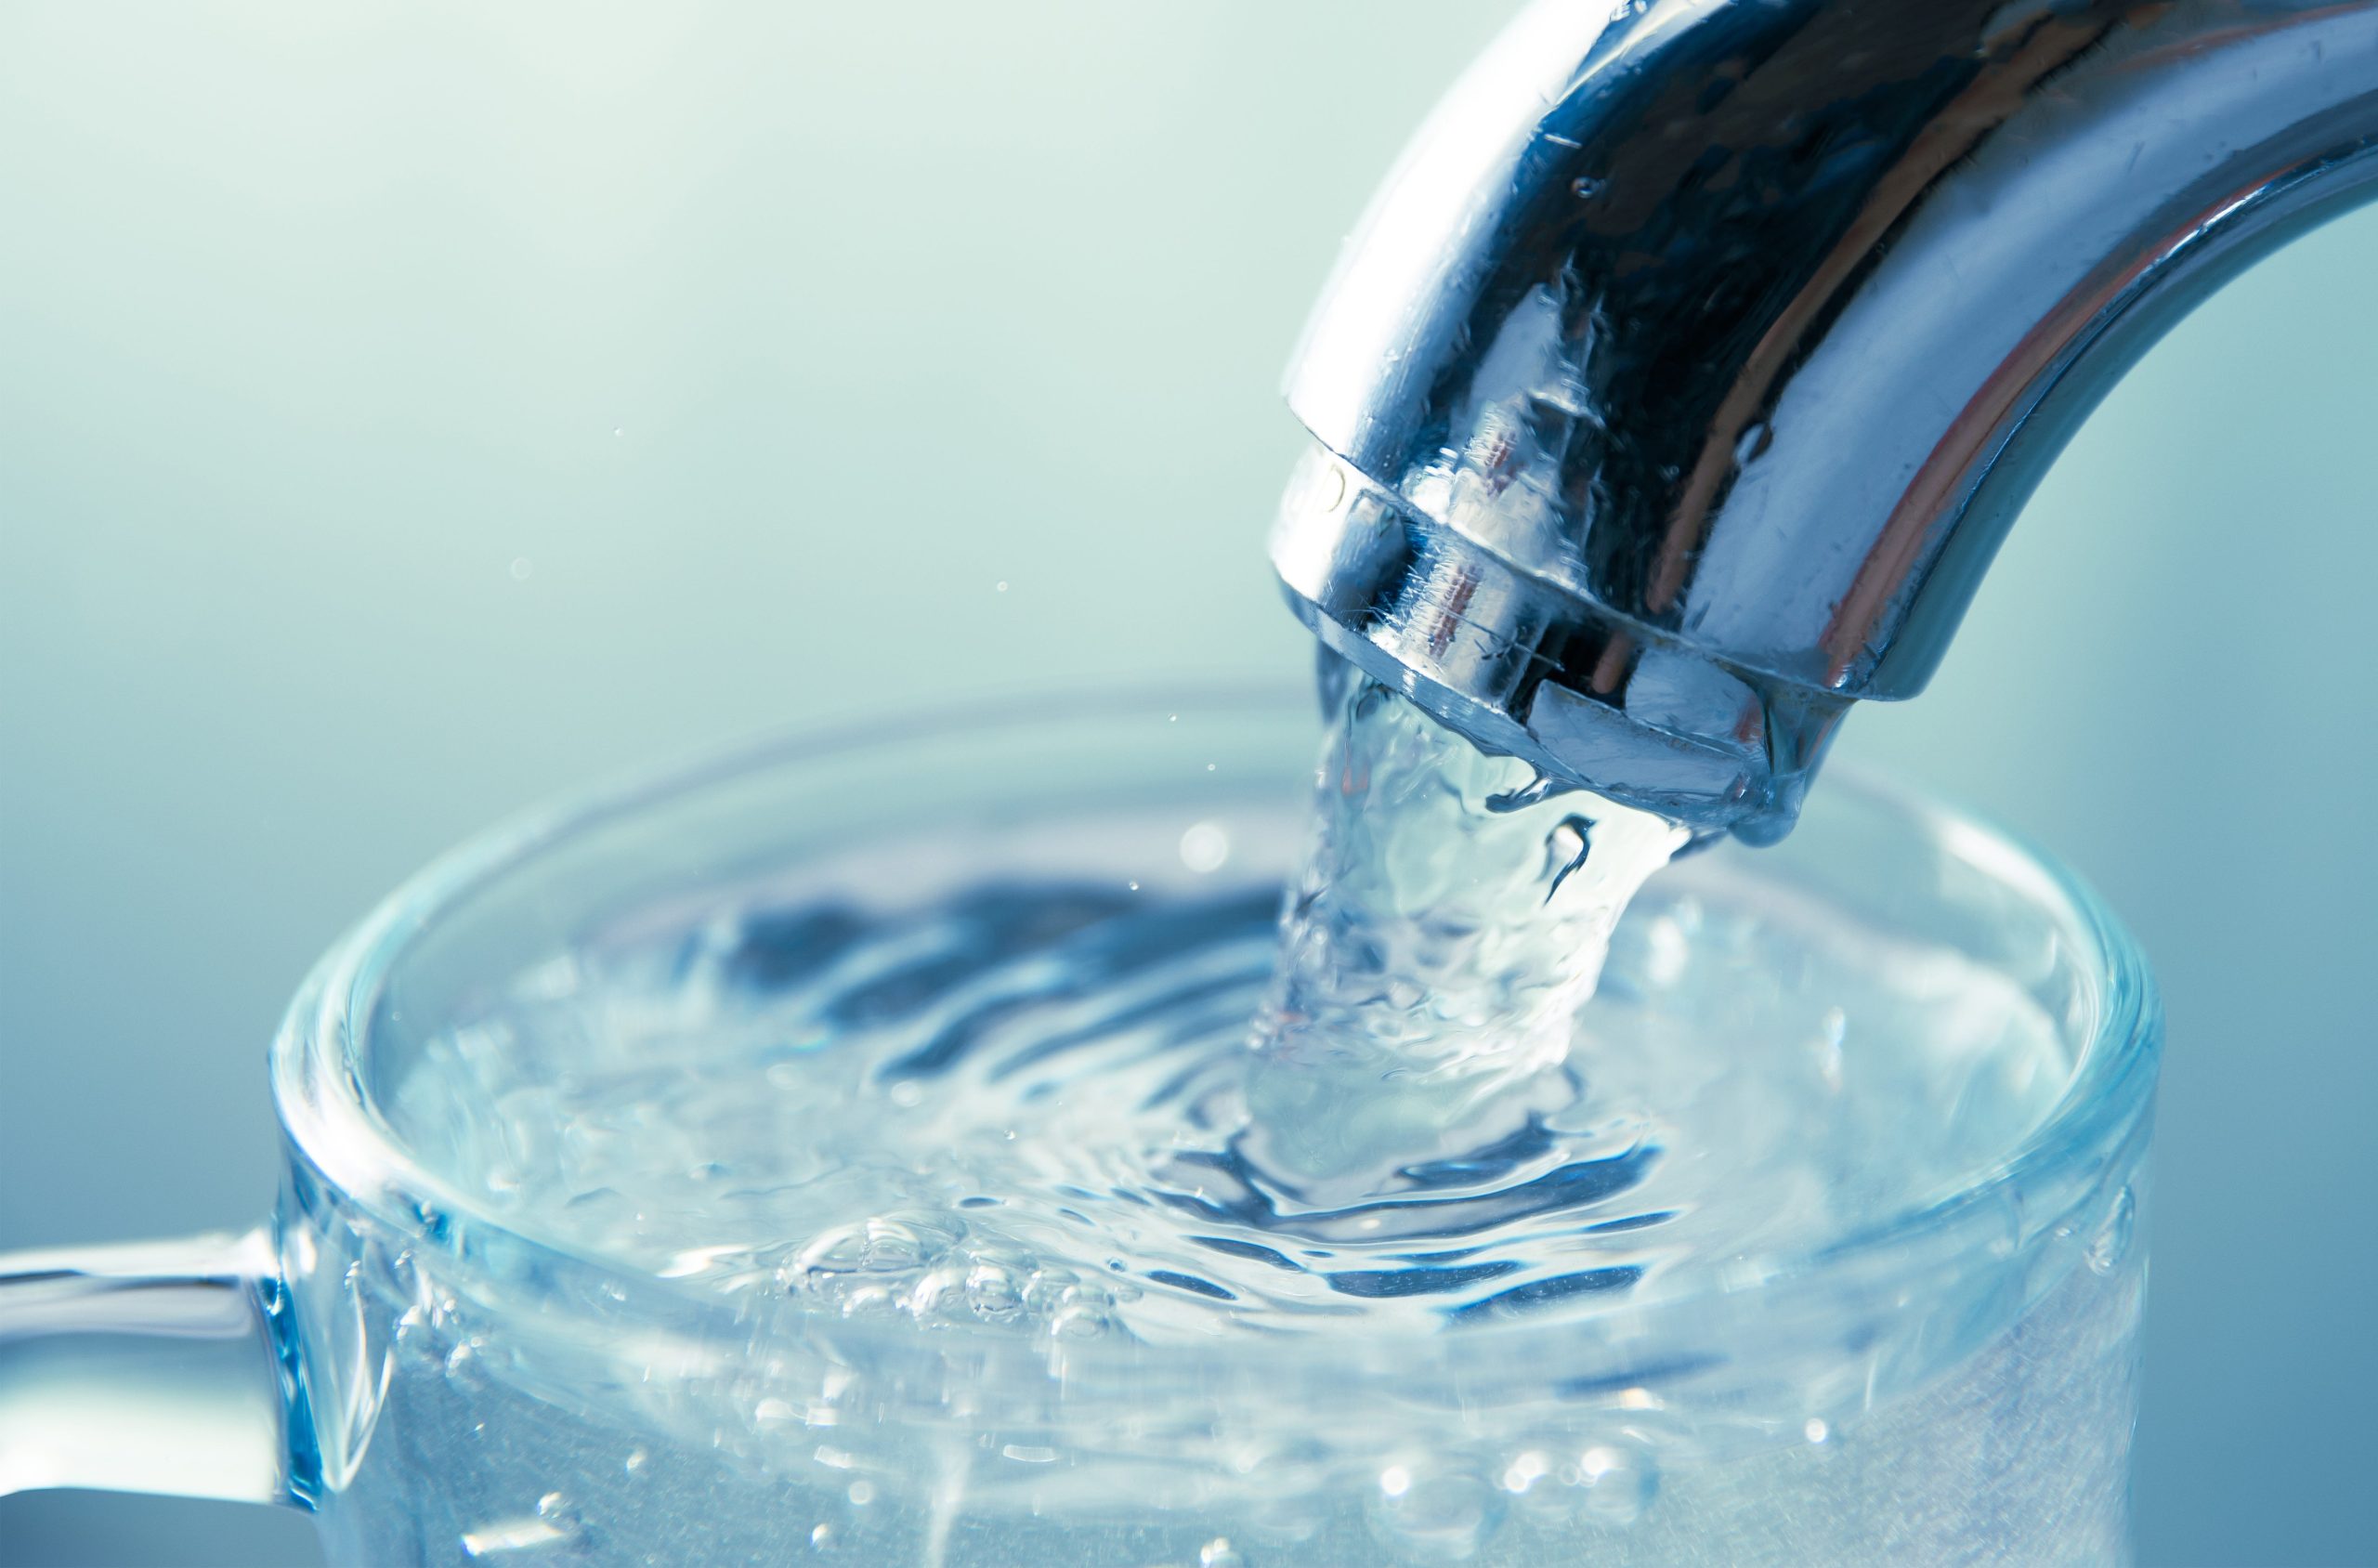 Carcinogen removal will cause water bill spikes [Video]